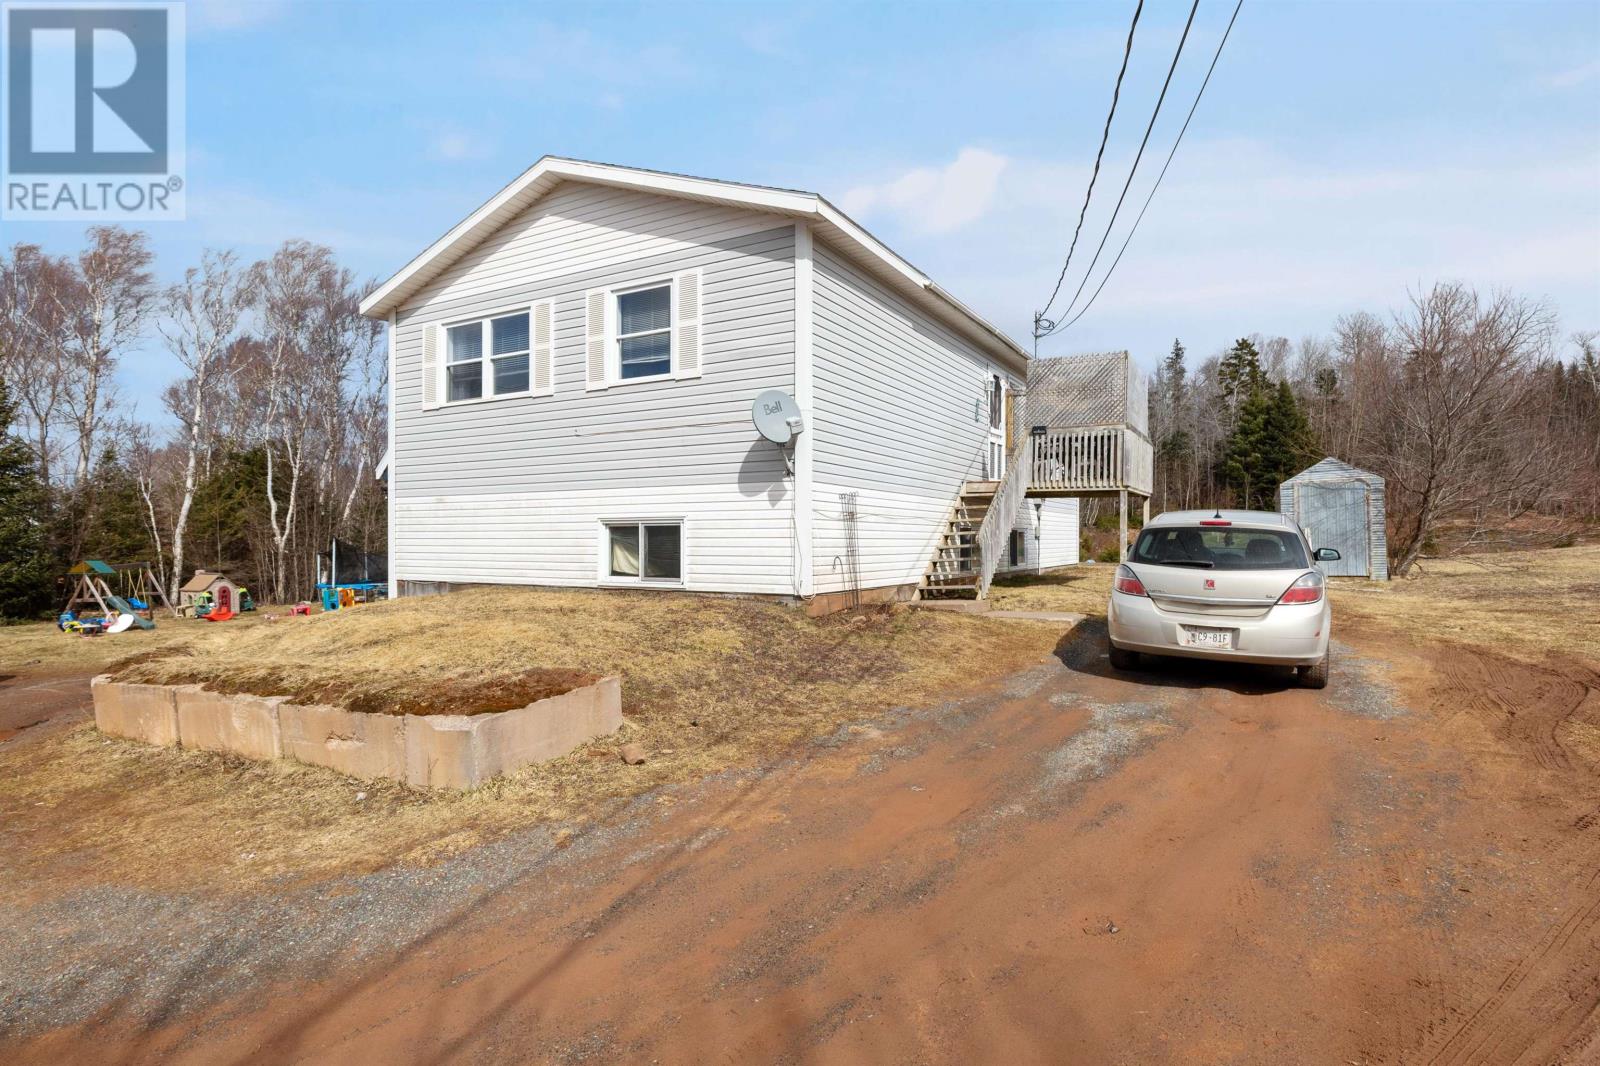 5819/5821 Campbell Road, Victoria Cross, Montague, Prince Edward Island  C0A 1R0 - Photo 1 - 202405682